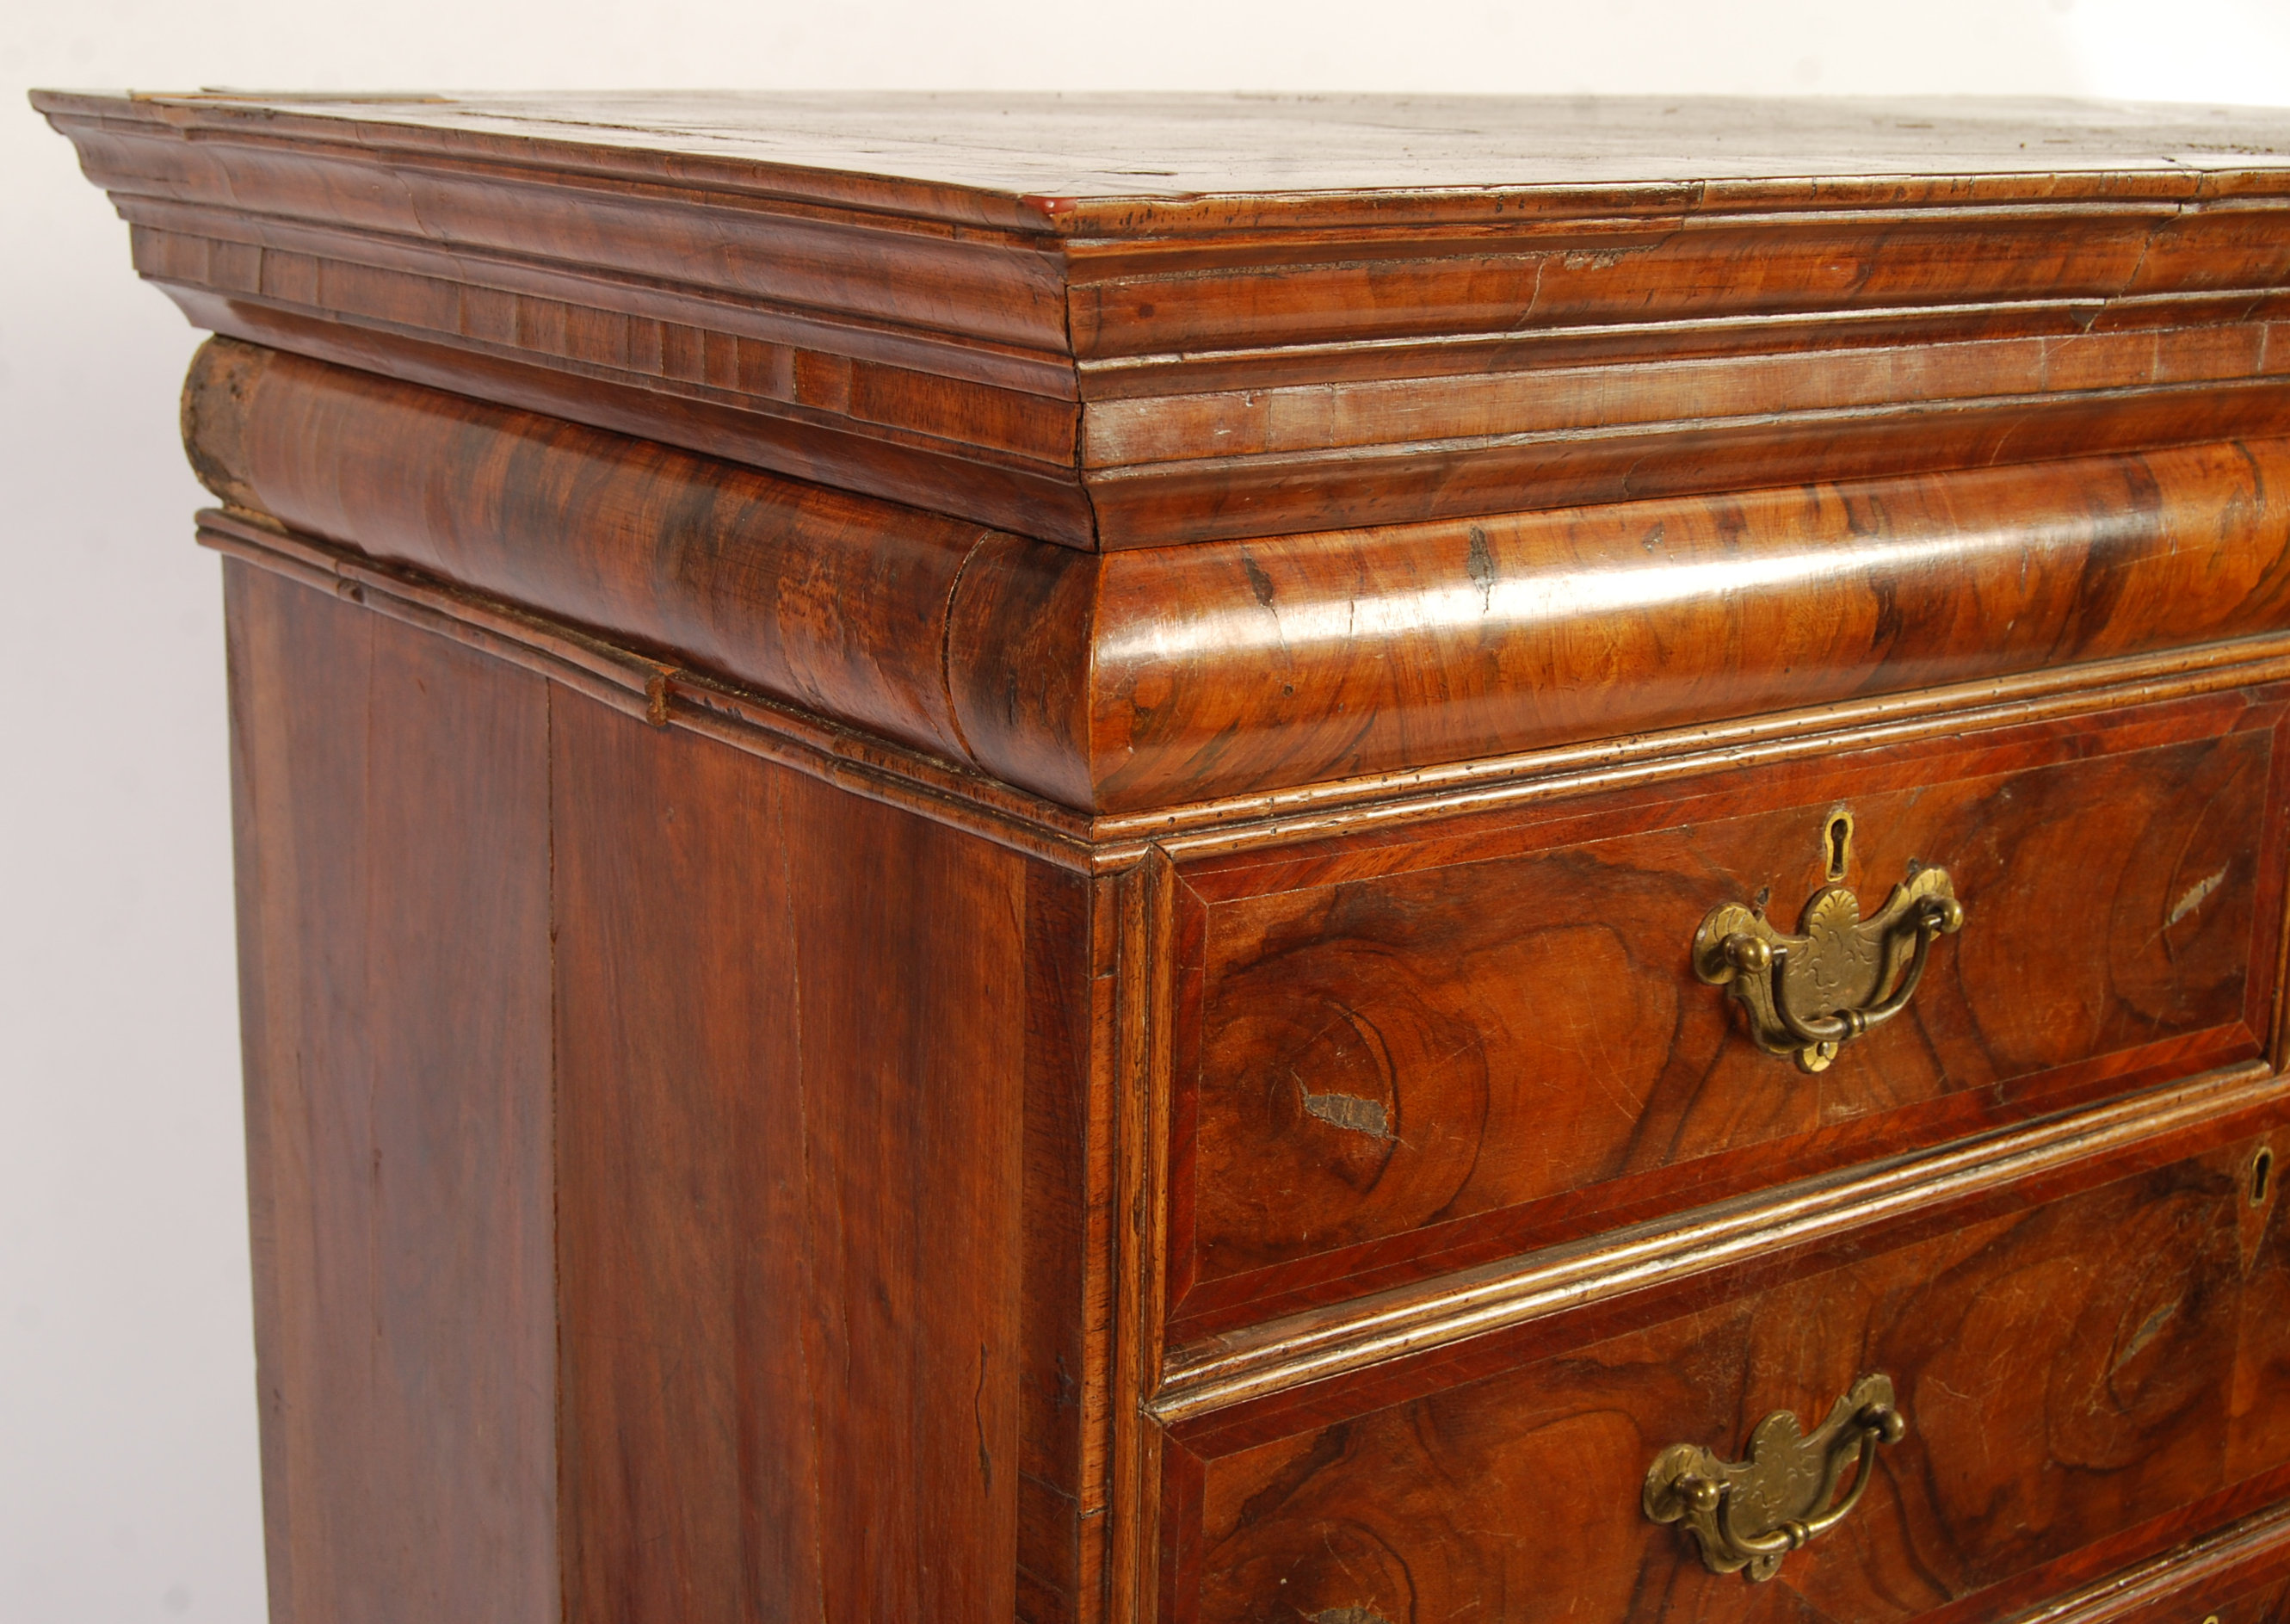 LATE 17TH / 18TH CENTURY WALNUT CHEST ON STAND - Image 5 of 11